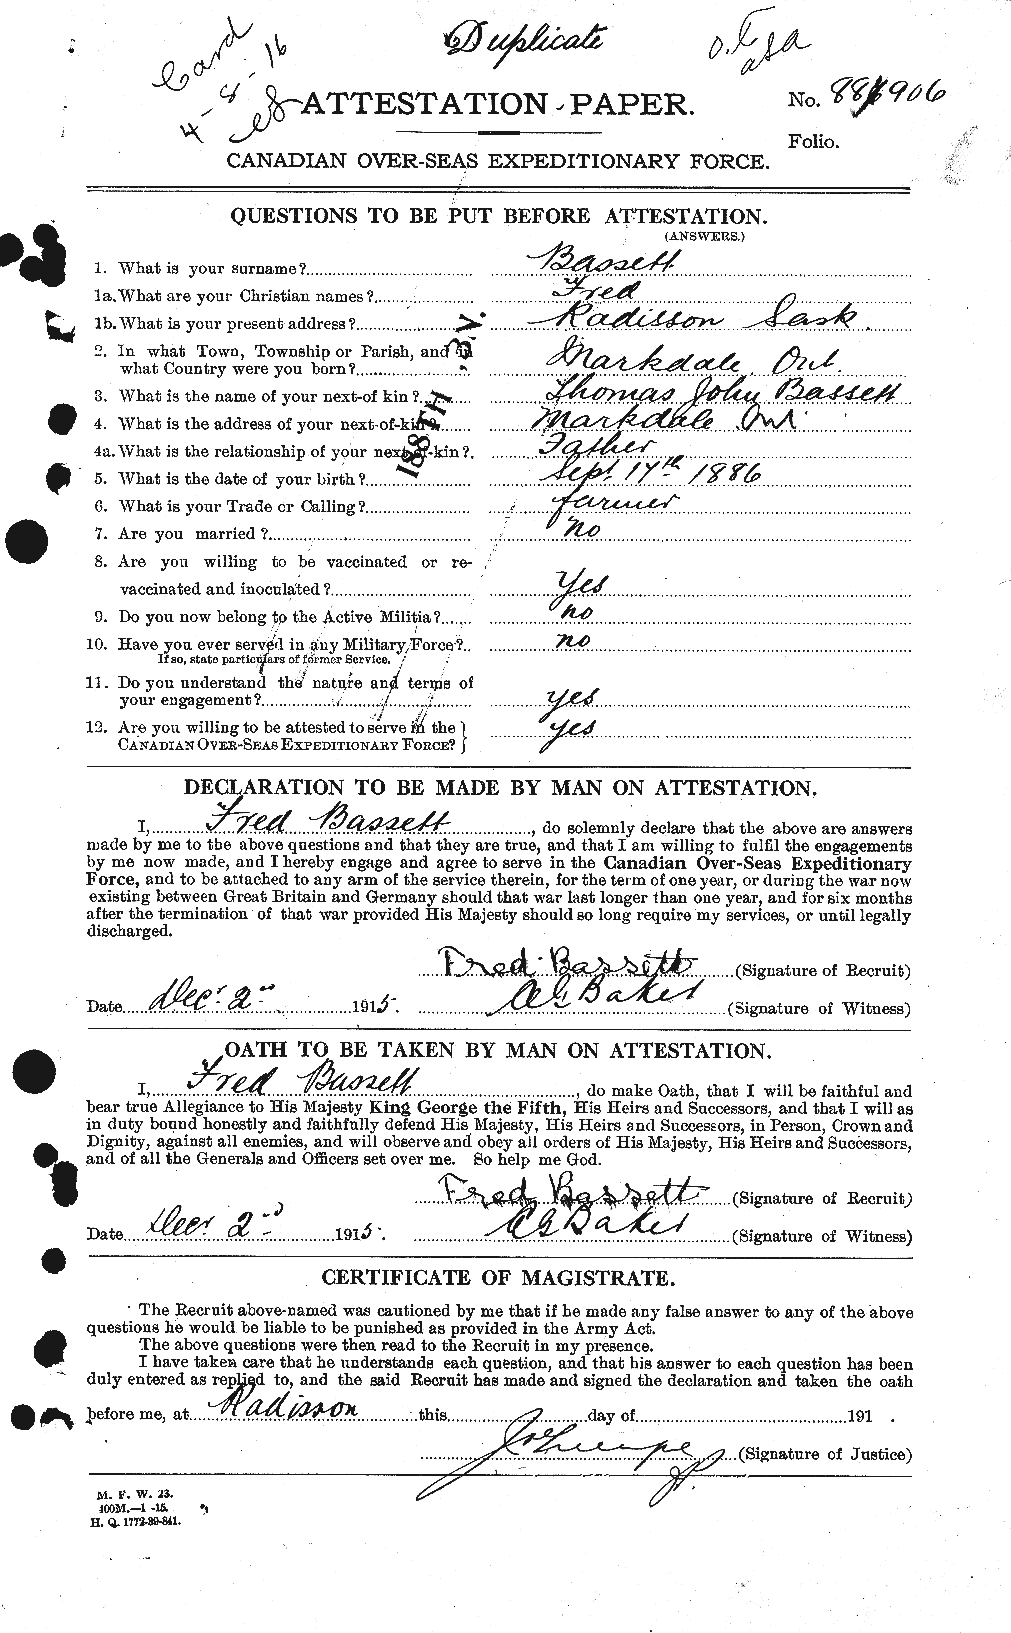 Personnel Records of the First World War - CEF 221070a